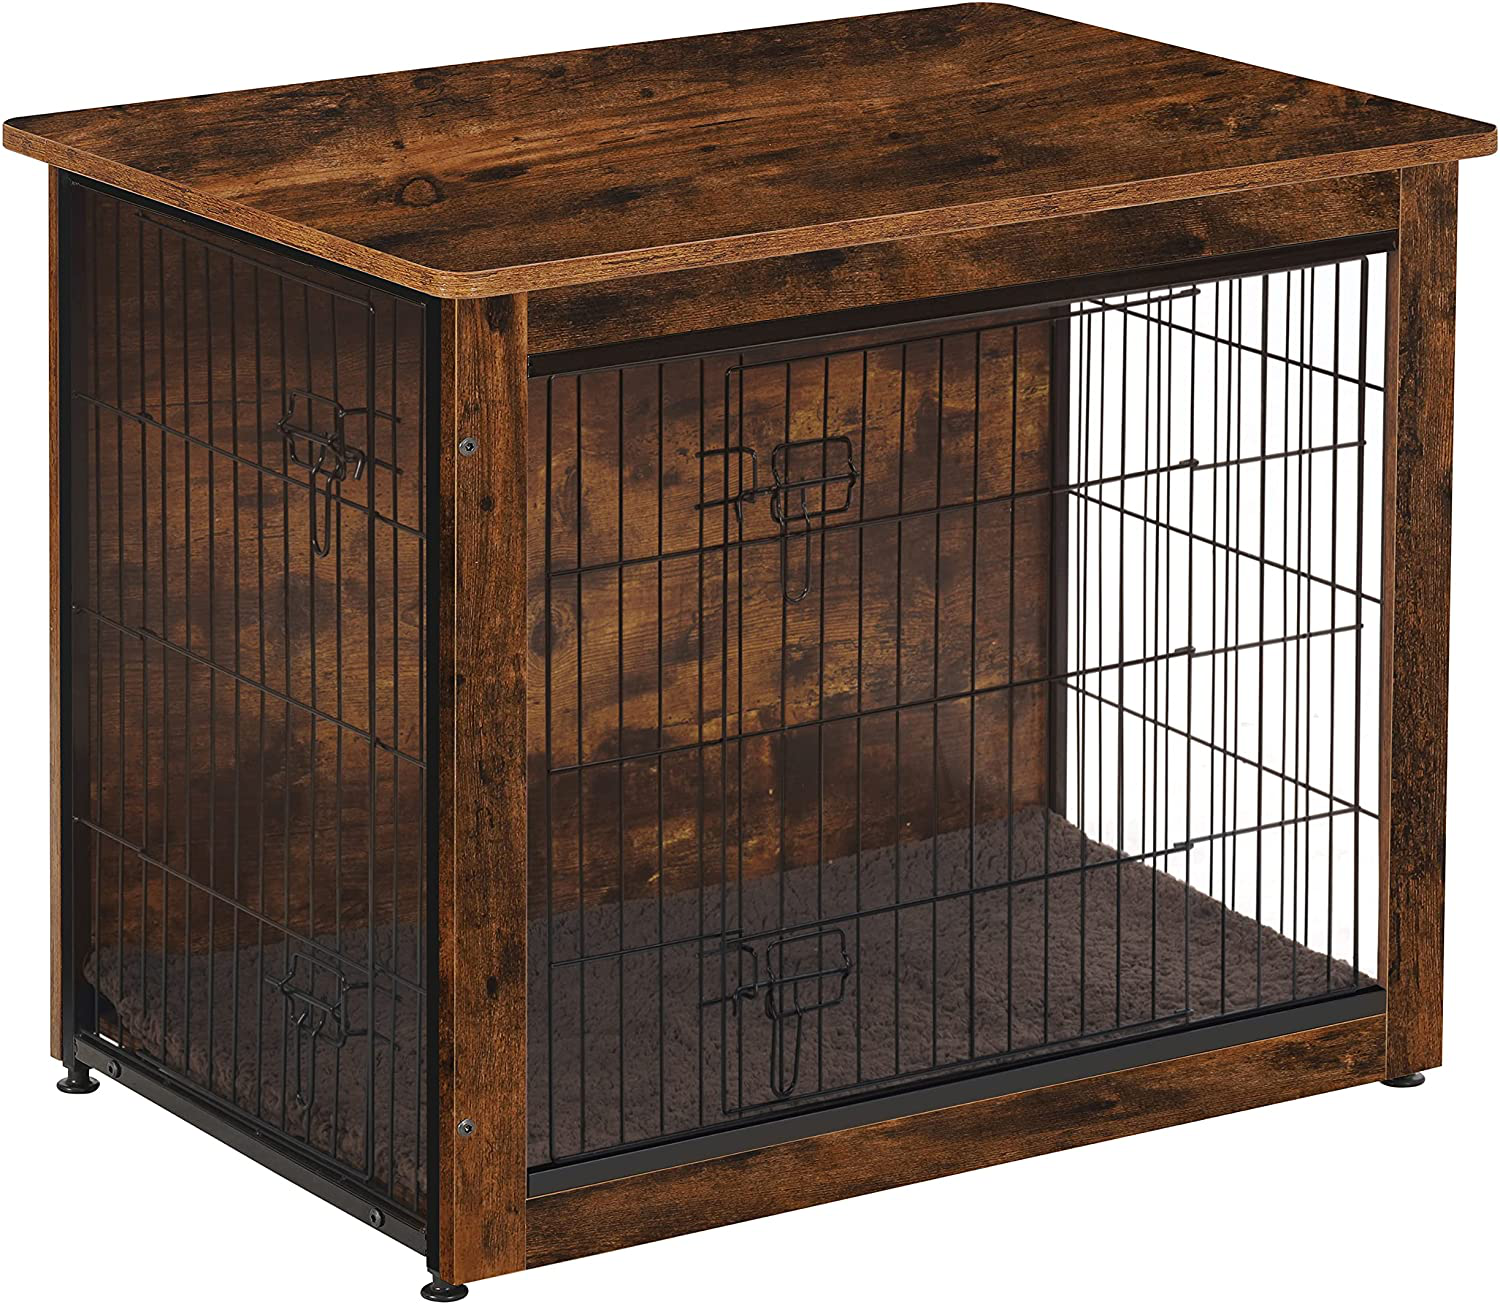 DWANTON Dog Crate Furniture, Wooden Pet Crate End Table, Indoor Dog Kennel for Small/Medium/Large Dog Animals & Pet Supplies > Pet Supplies > Dog Supplies > Dog Kennels & Runs Dwanton 38.5" L x 25.6" W x 26.8" H  